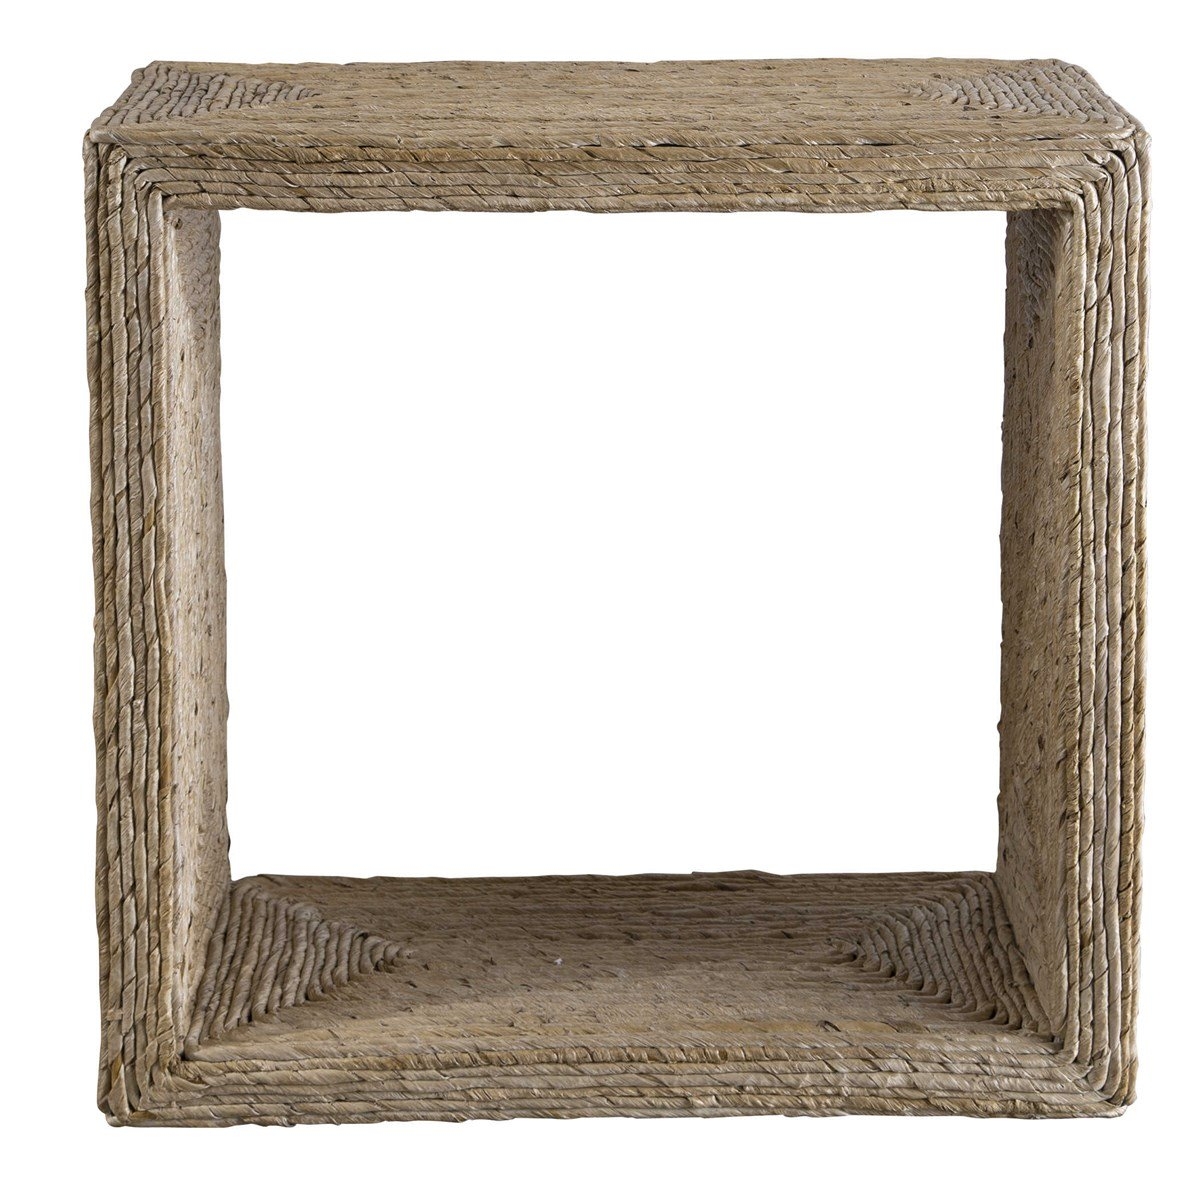 RORA SIDE TABLE - Image 1